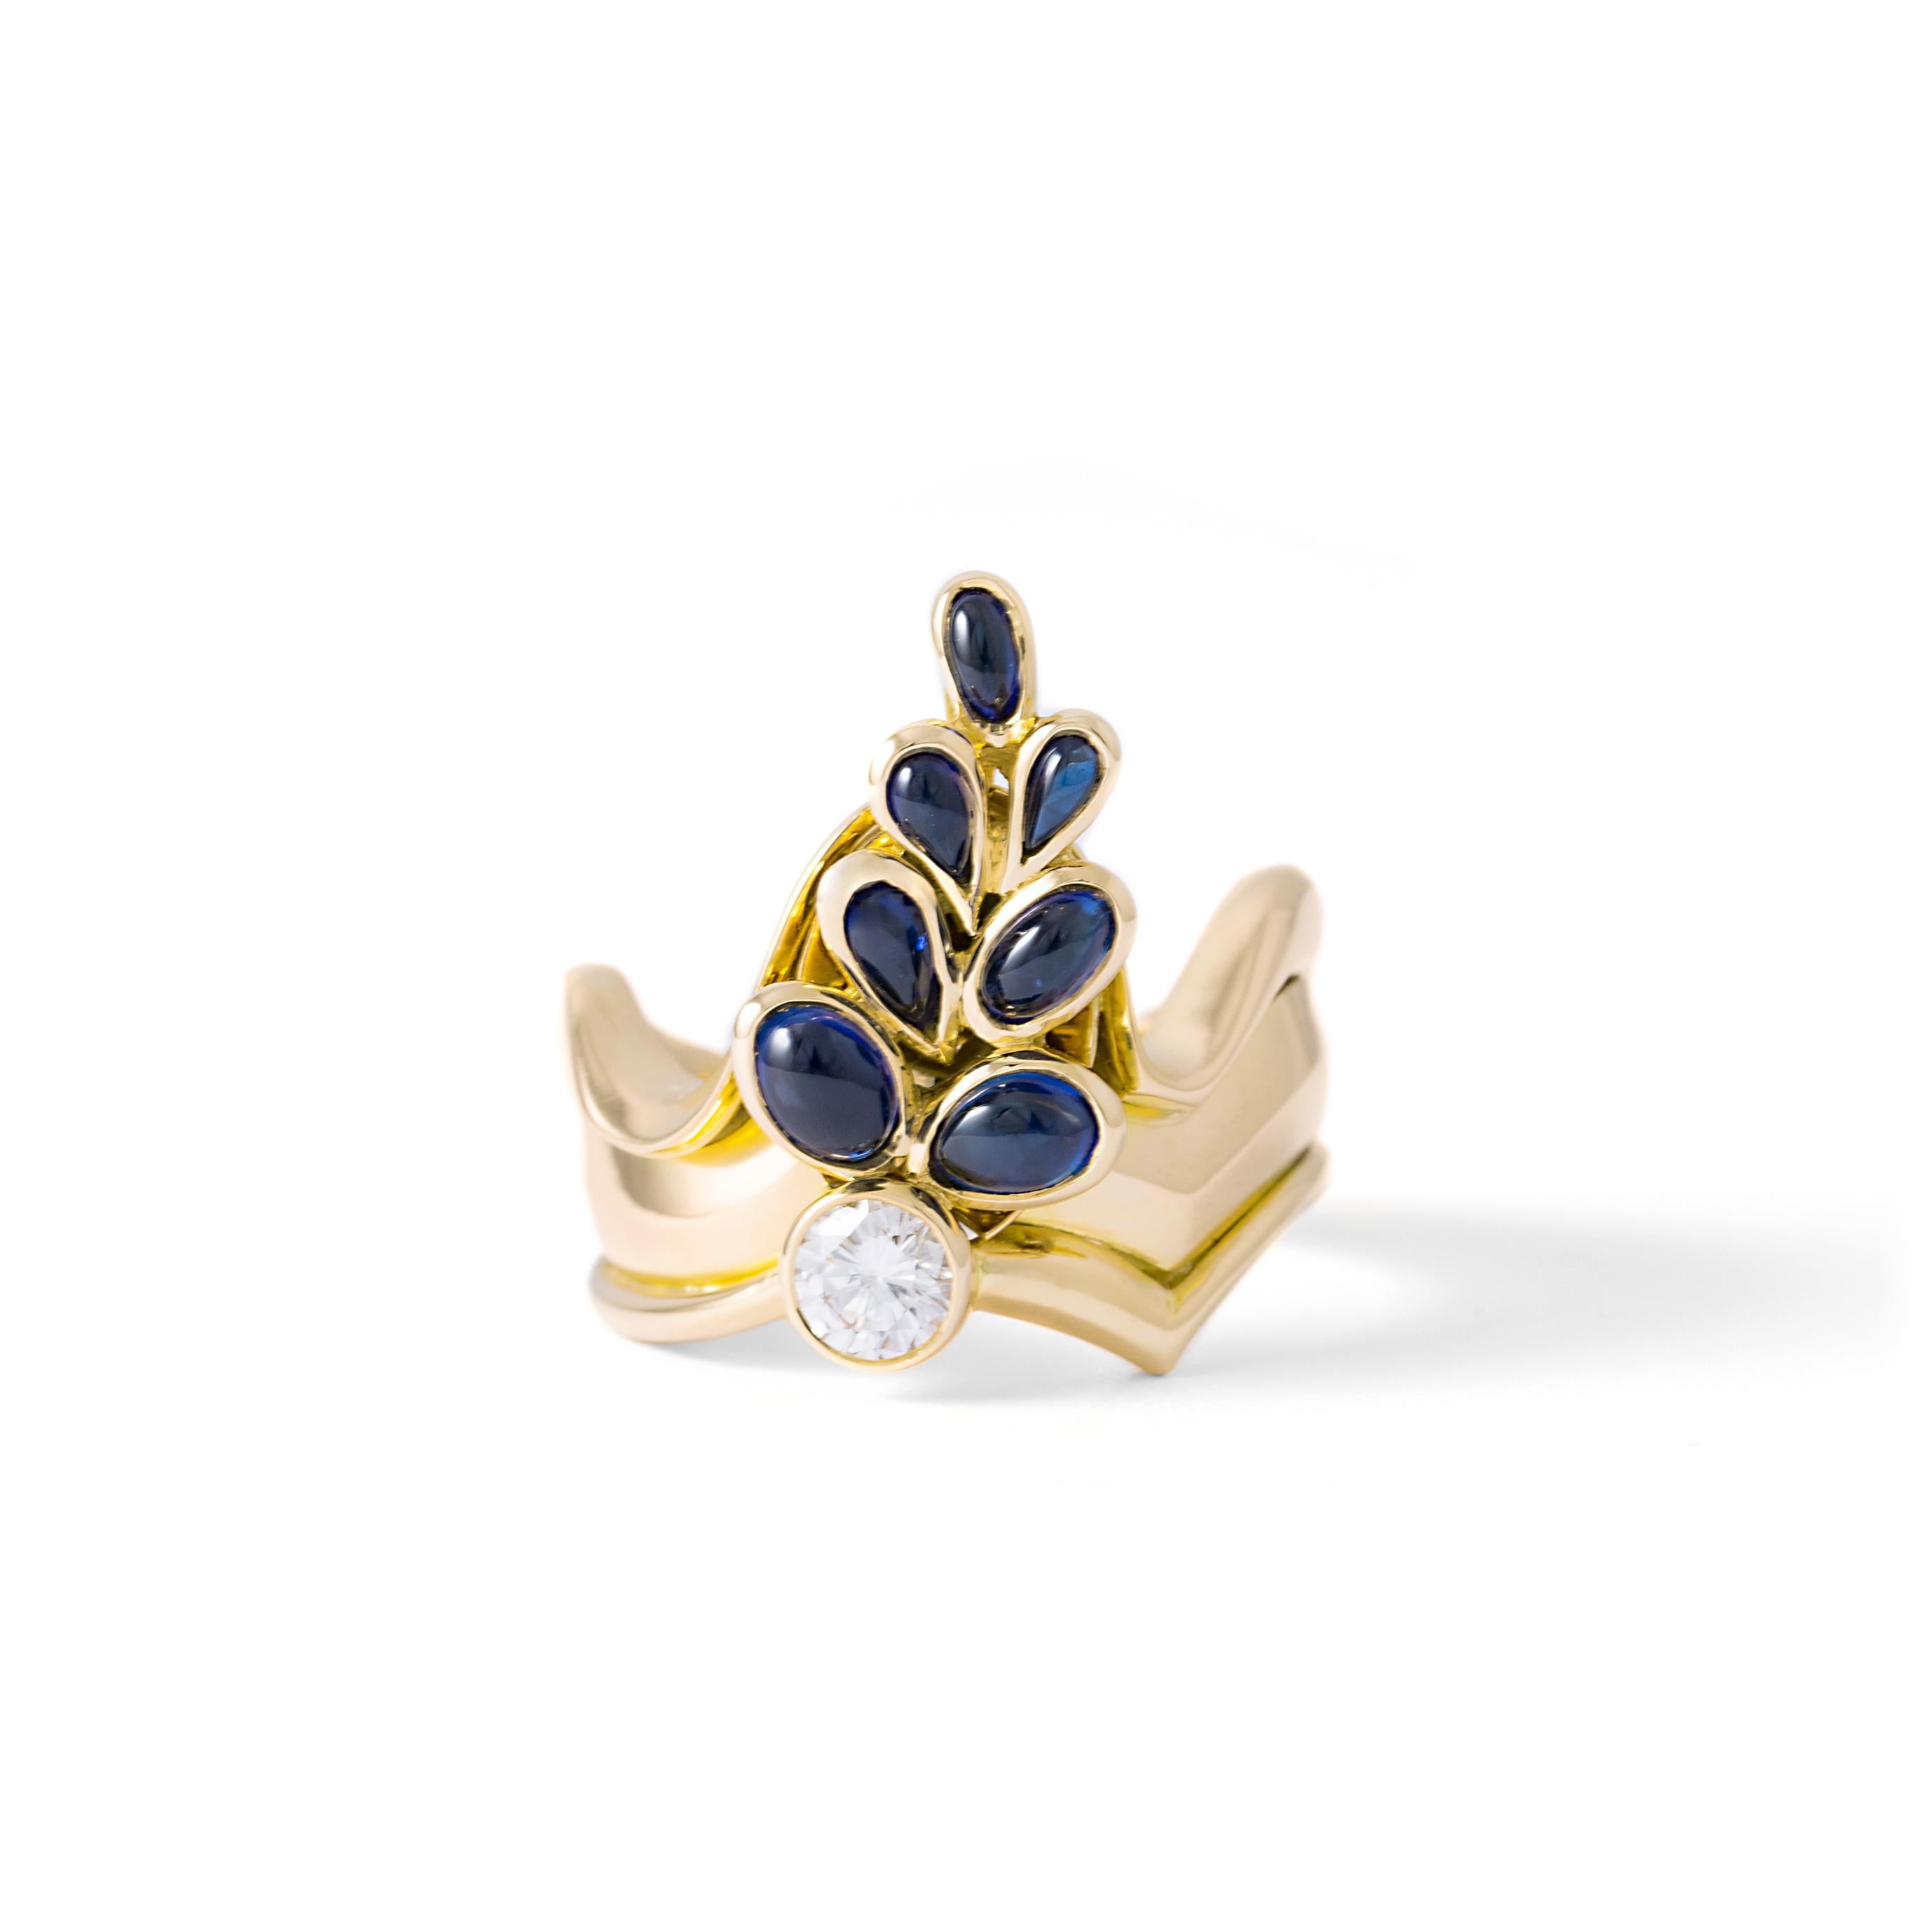 Ring in 18kt yellow gold set with 7 cabochon cut sapphires 1.60 cts and one diamond 0.030 cts
Size 53       